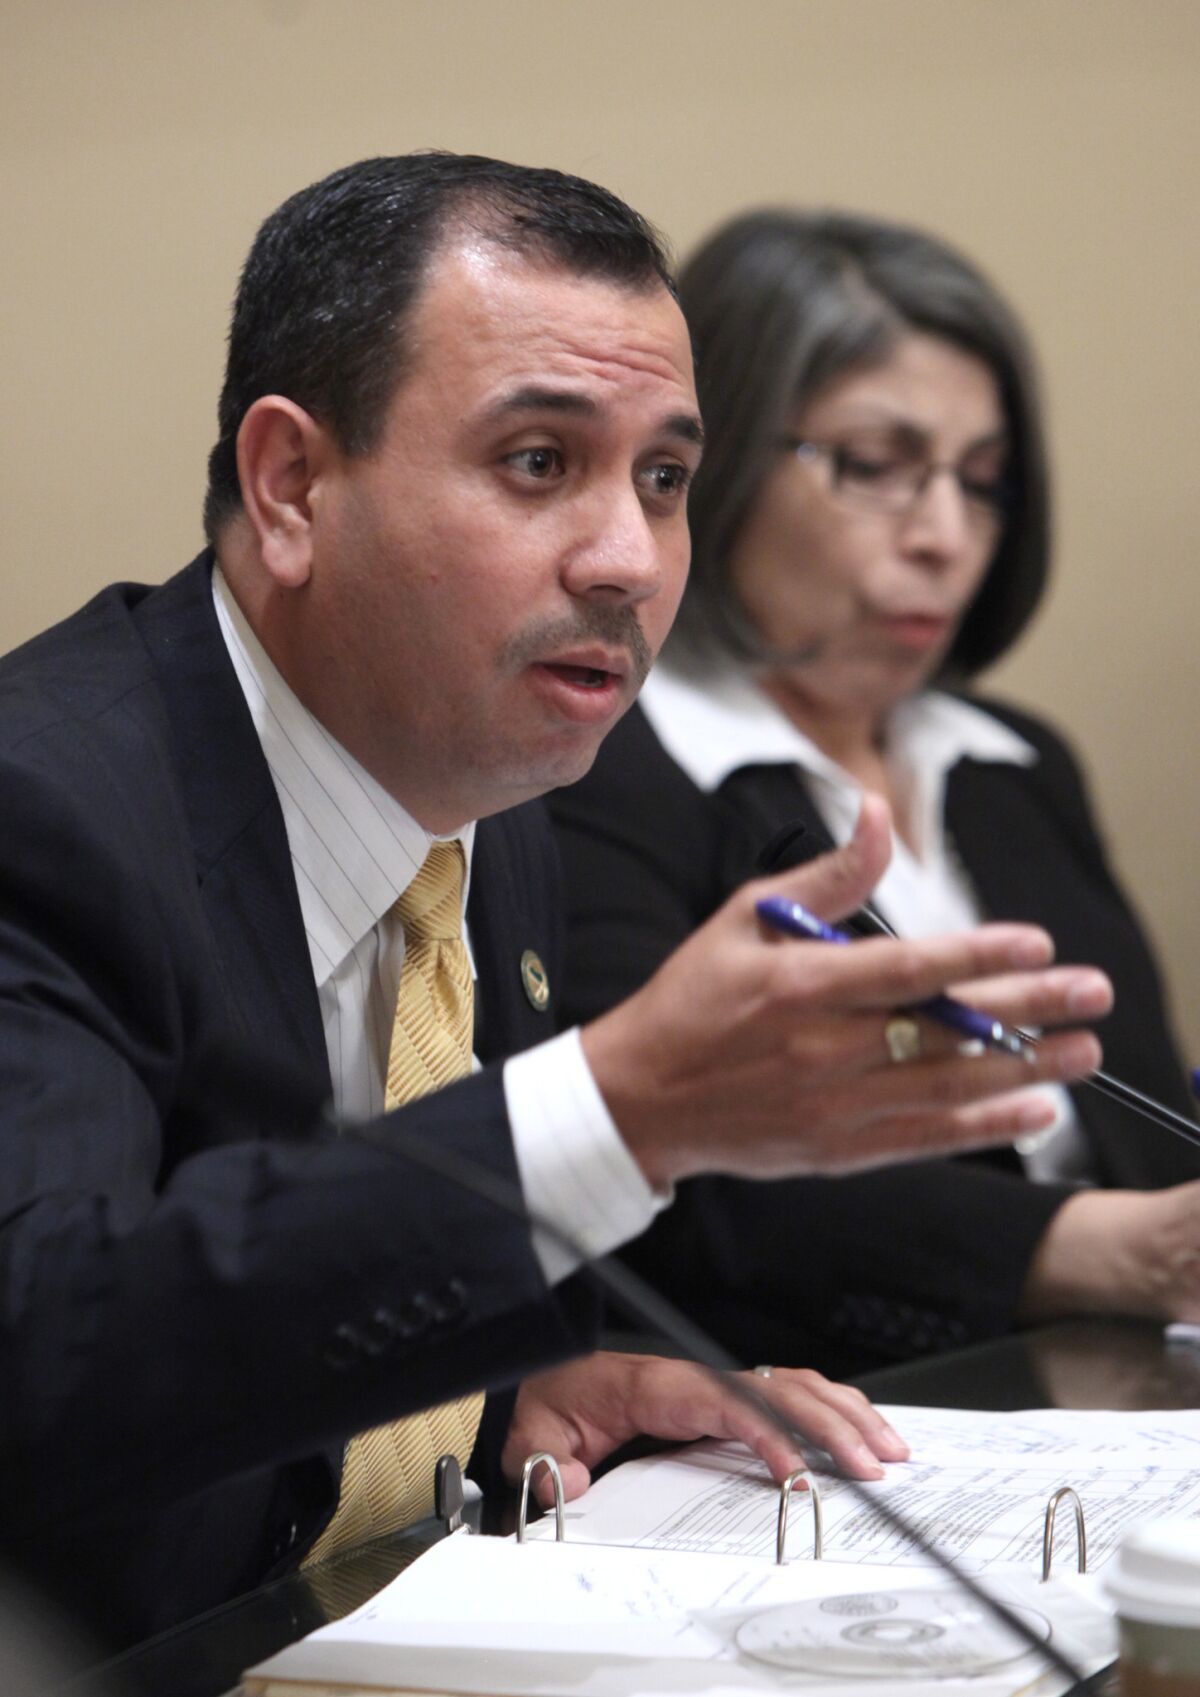 Sen. Tony Mendoza (D-Artesia) is among those fined this year by the state Fair Political Practices Commission for campaign finance violations.